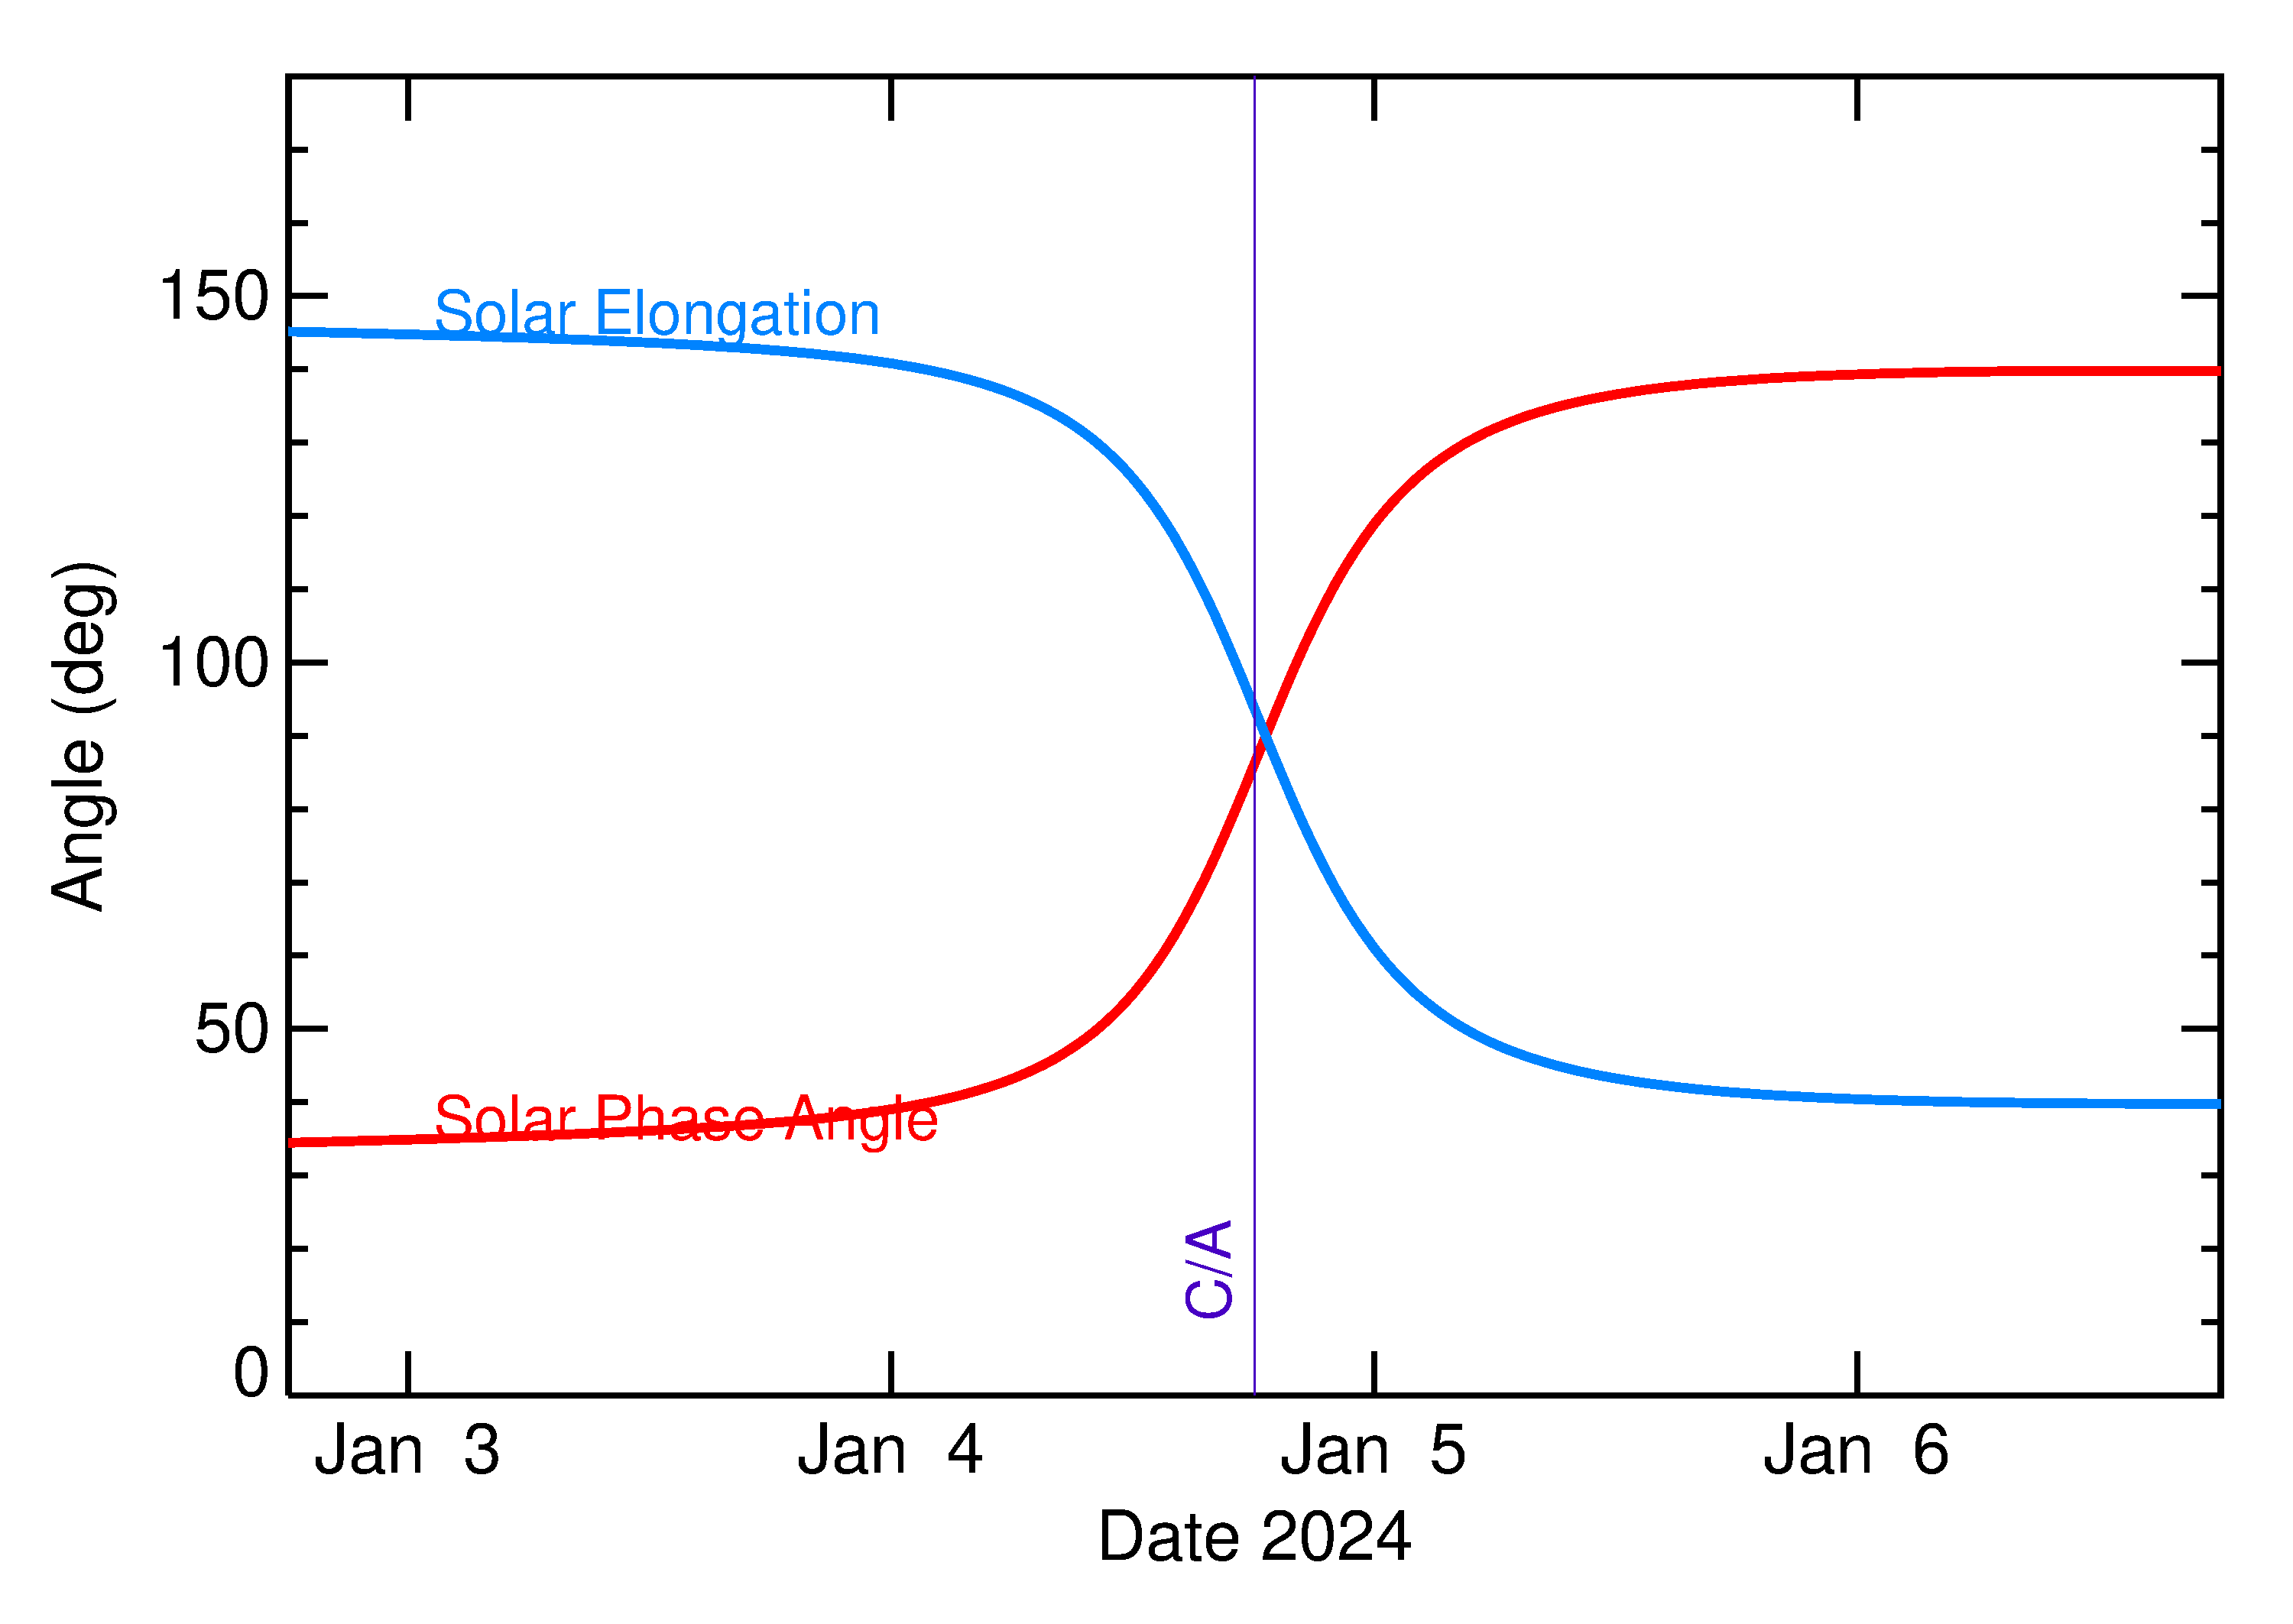 Solar Elongation and Solar Phase Angle of 2024 AD in the days around closest approach